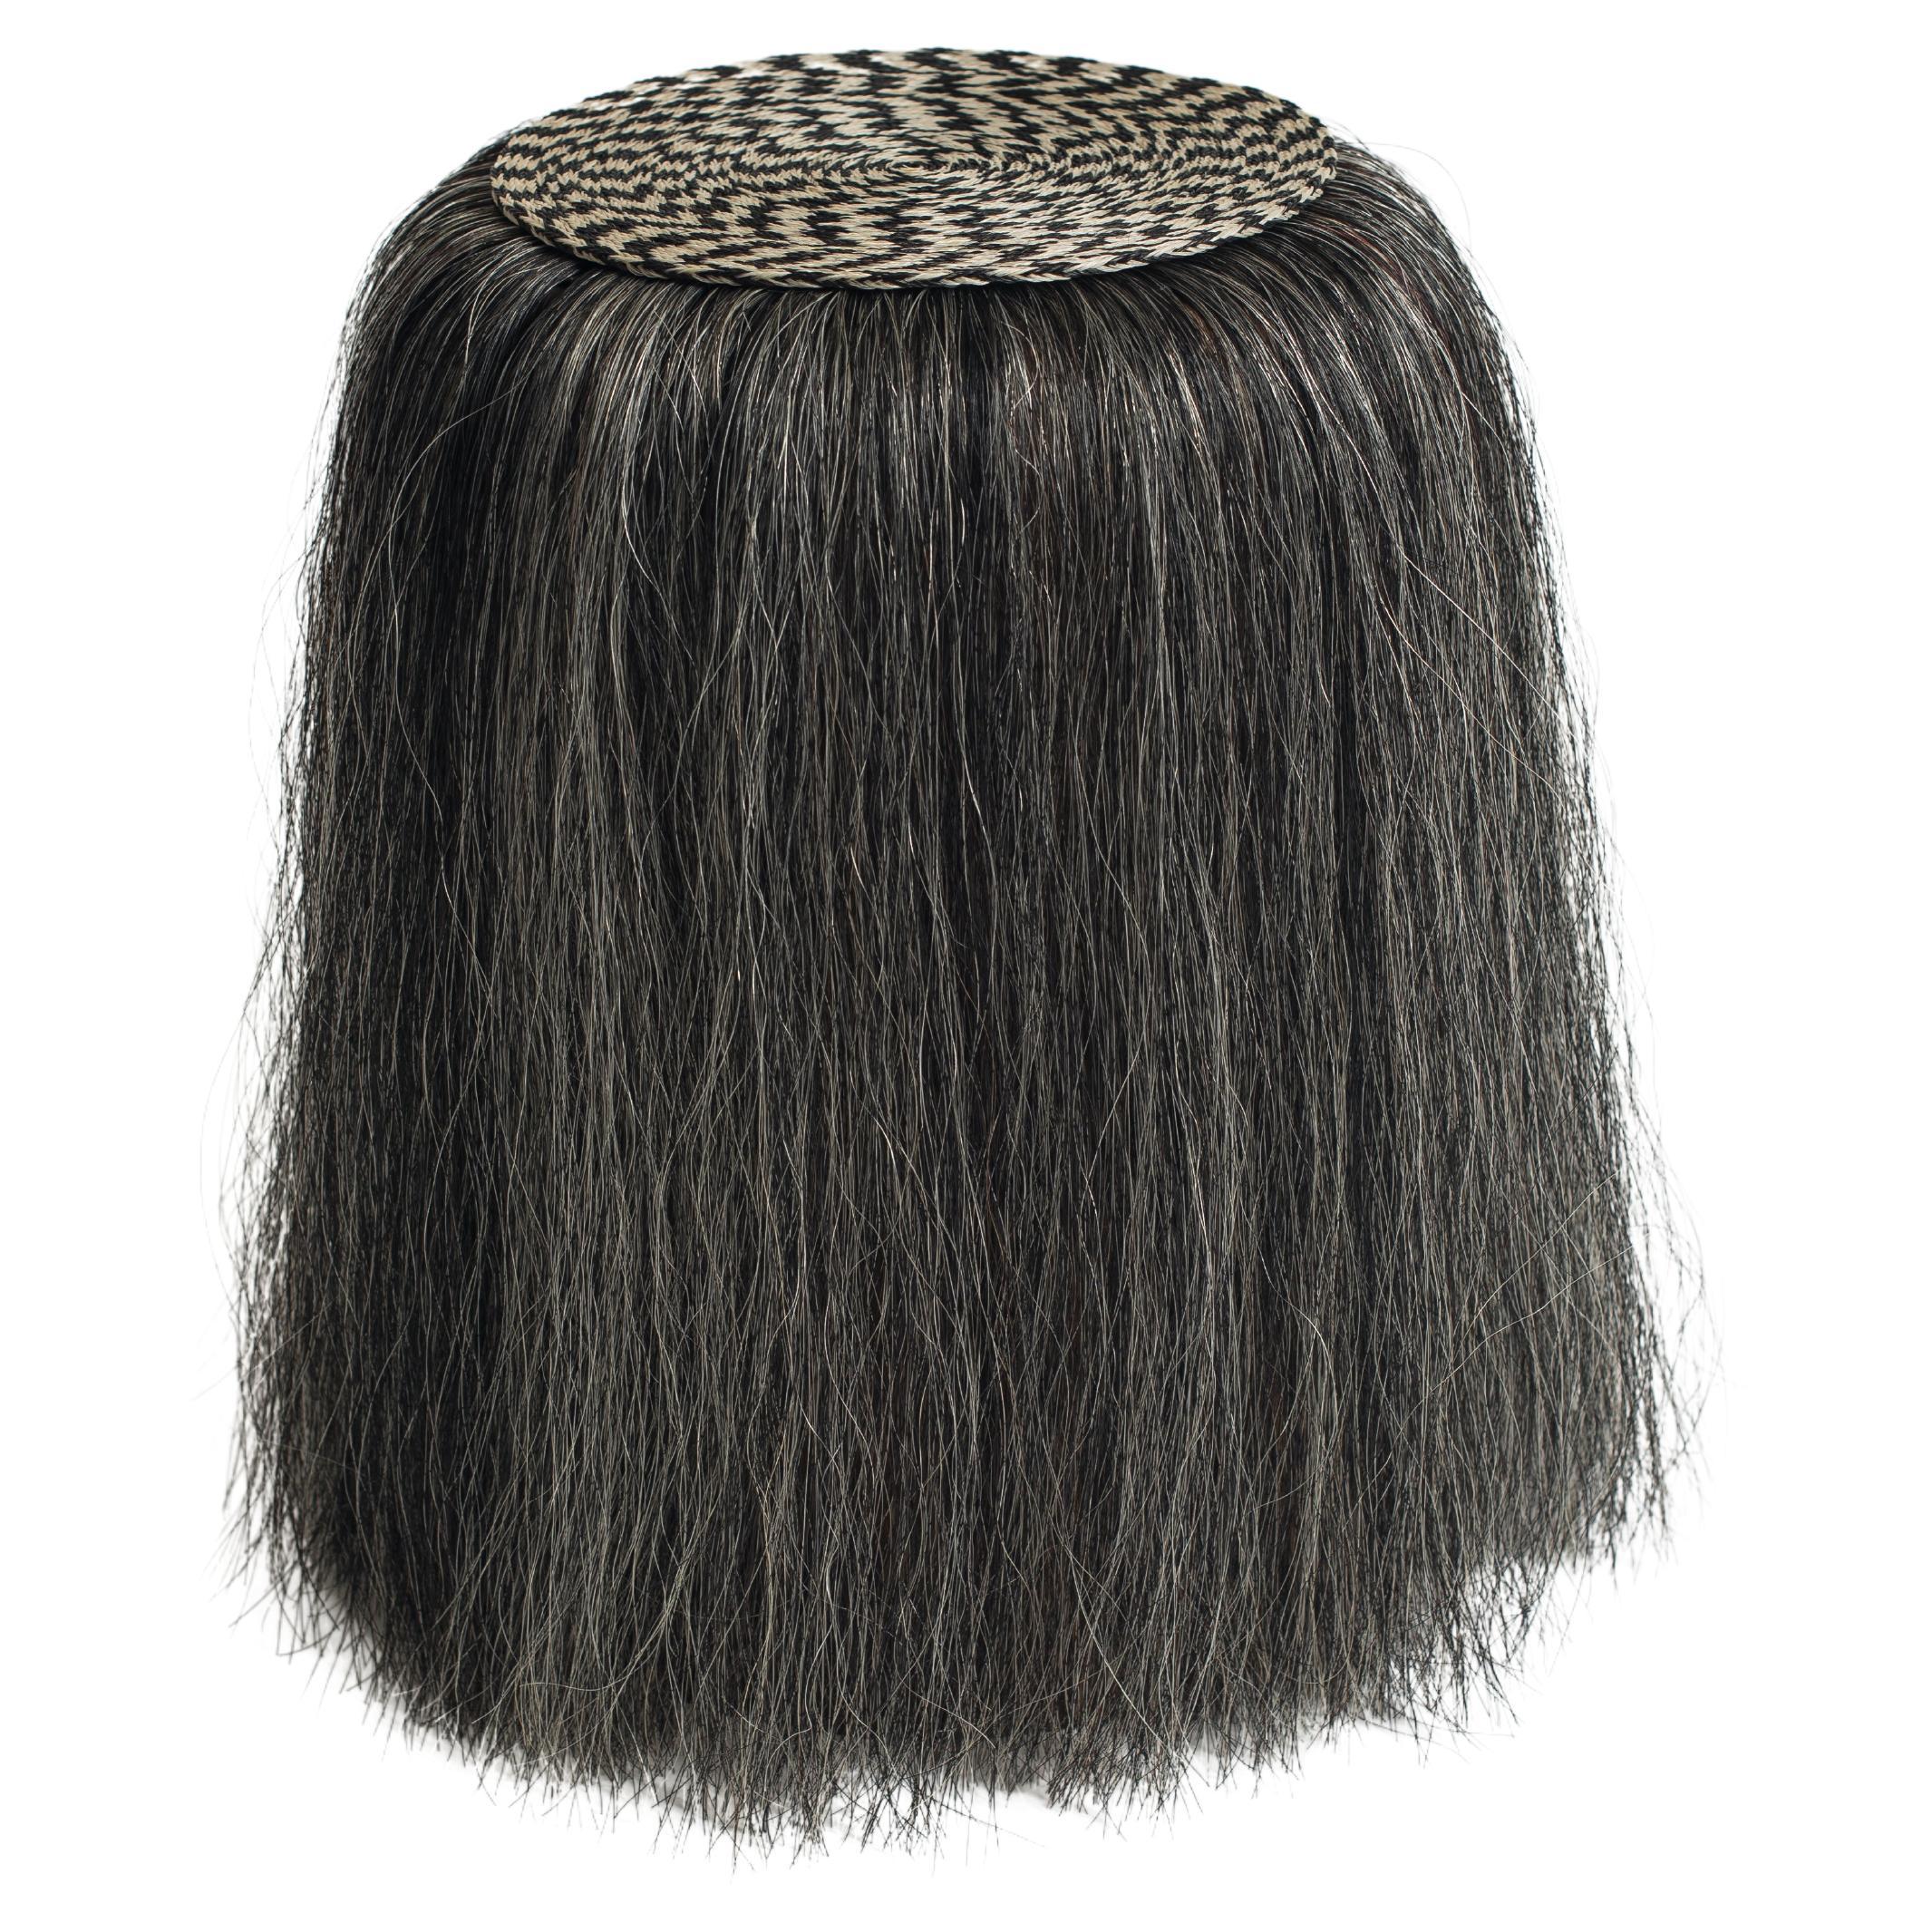 Cuaco Stool - Checkered handwoven horsehair solid wood stool from Mexico. For Sale